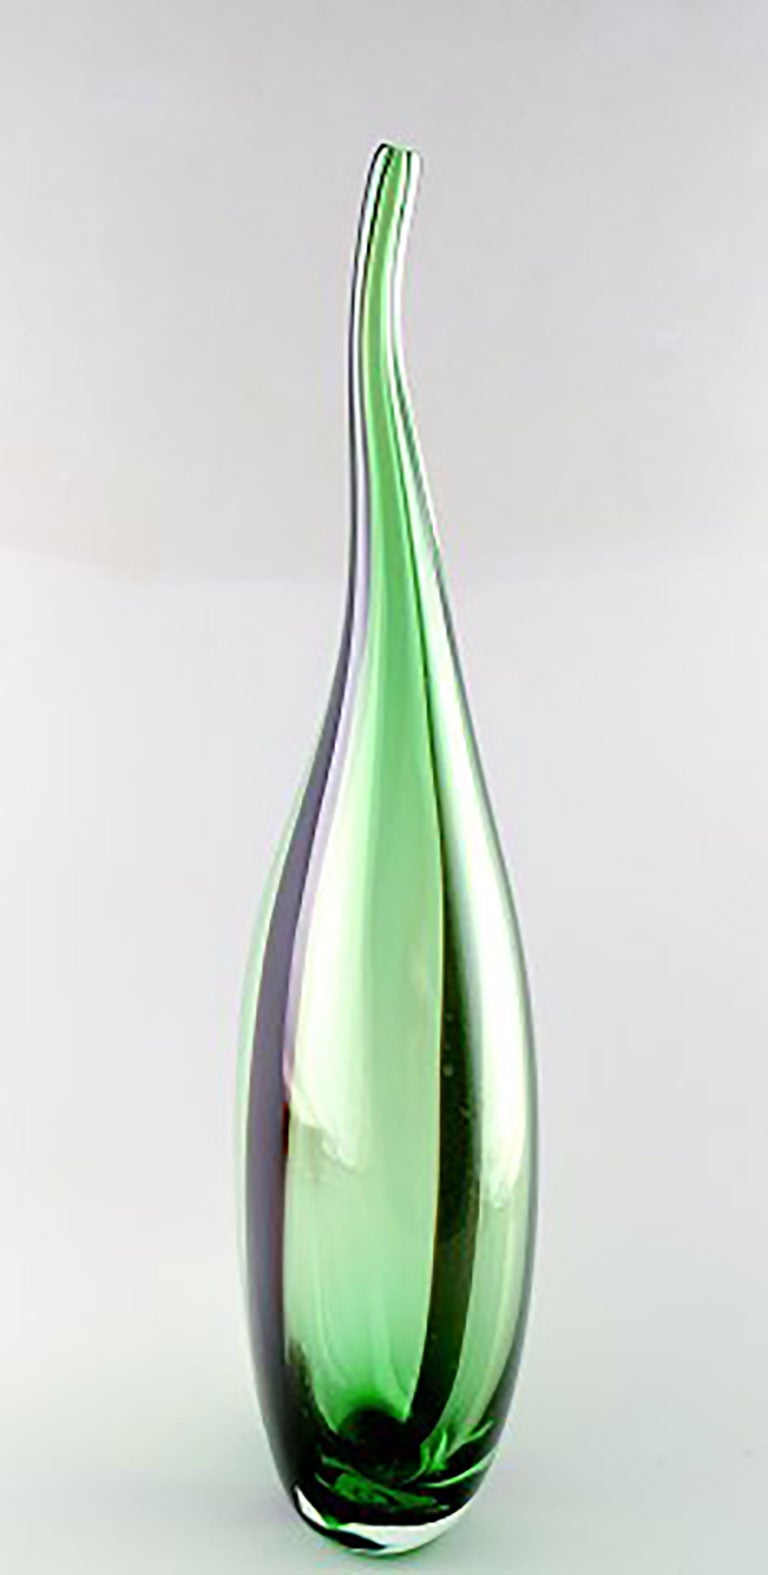 Murano large art glass floor vase, unstamped.
In perfect condition. Measures: 56 cm.